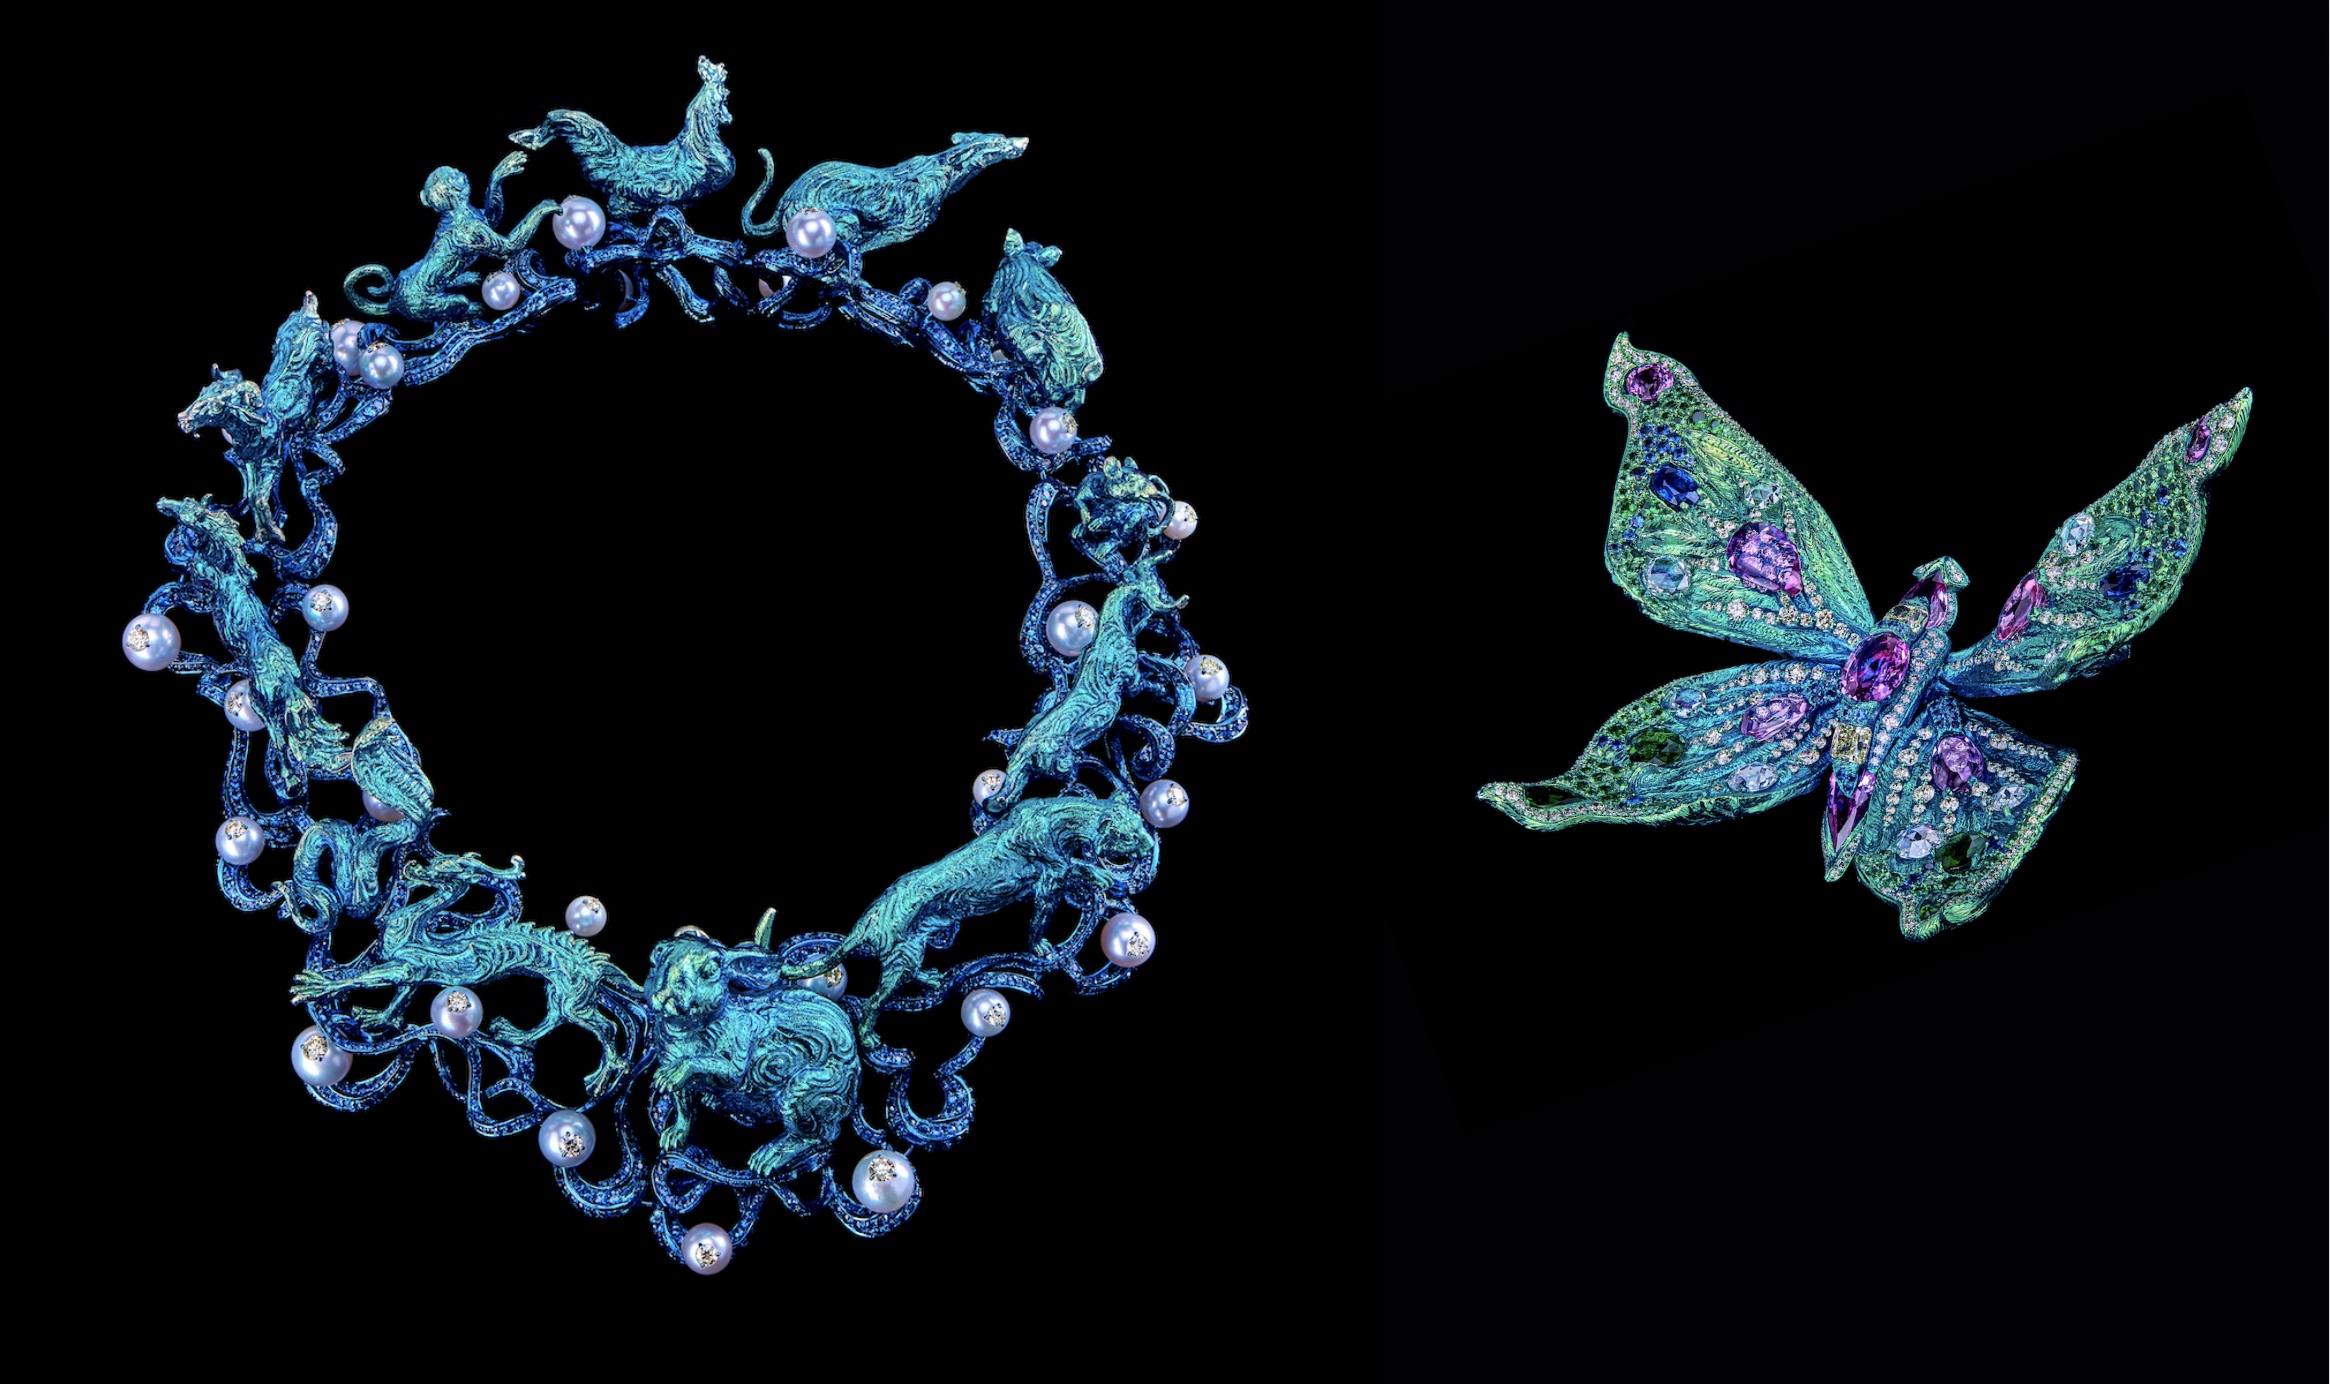 Wallace Chan jewellery exhibition at Christie’s – Antique Collecting